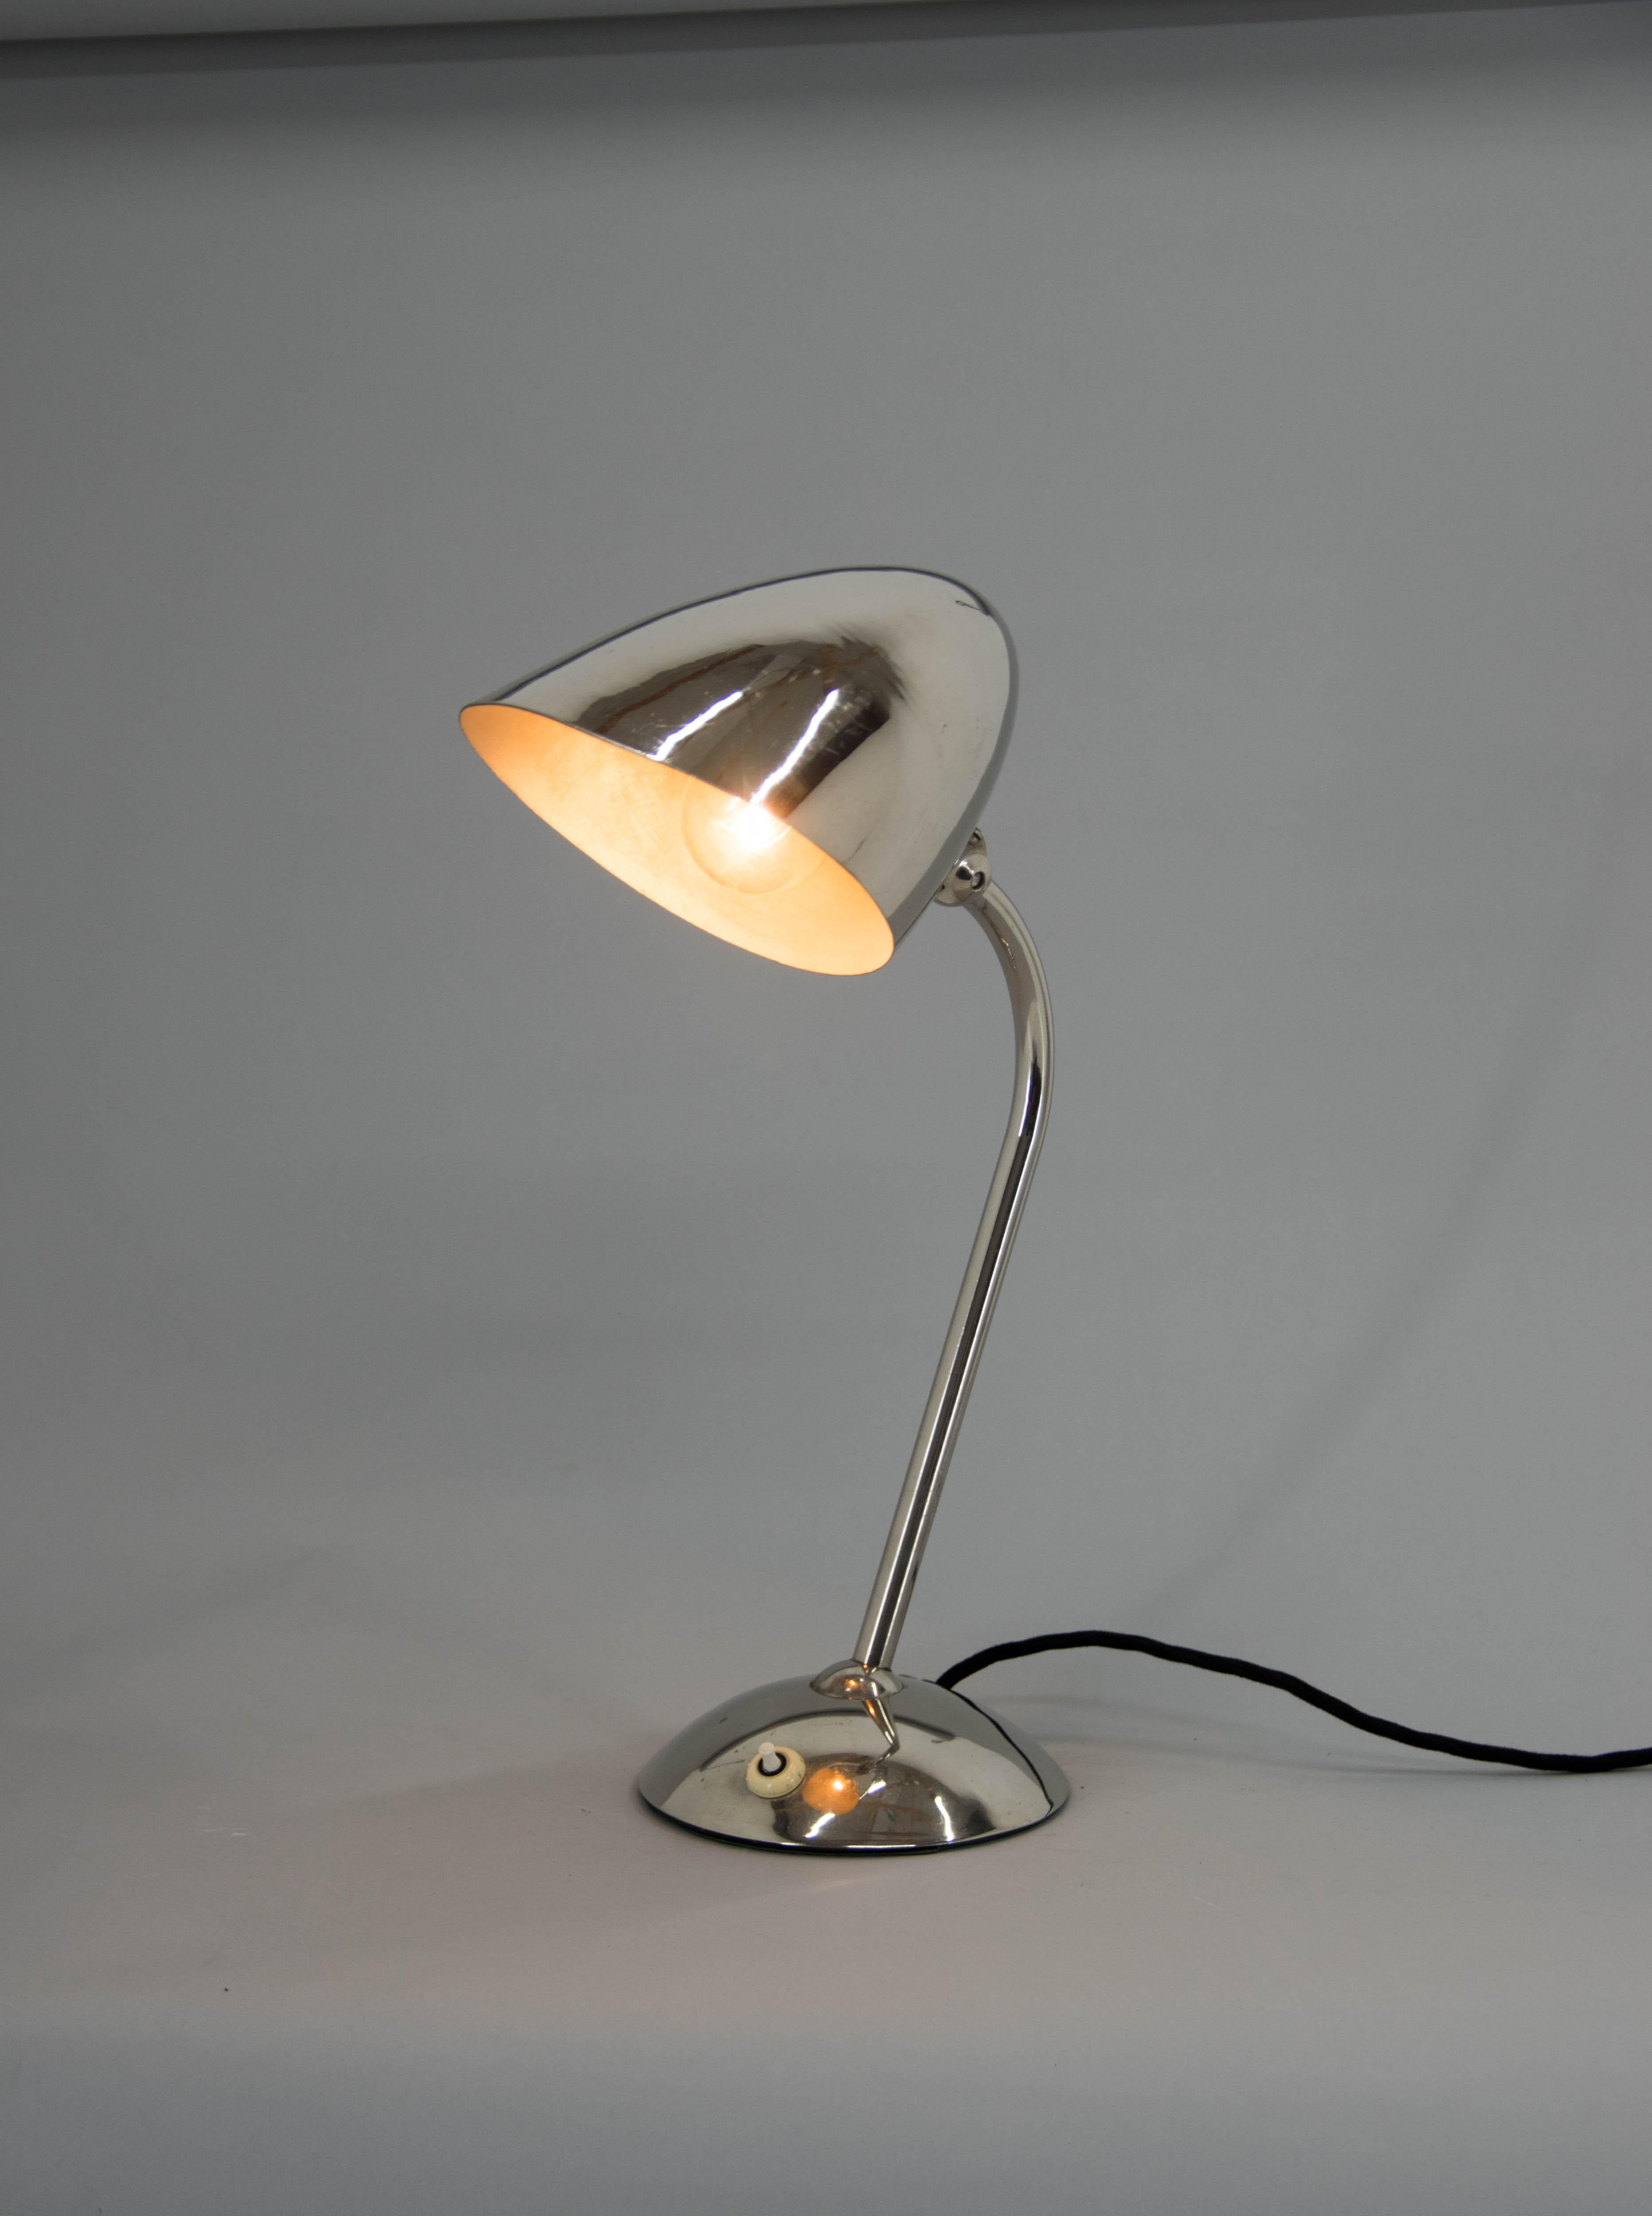 Functionalist / Bauhaus Flexible Table Lamp by Franta Anyz, 1930s In Good Condition For Sale In Praha, CZ